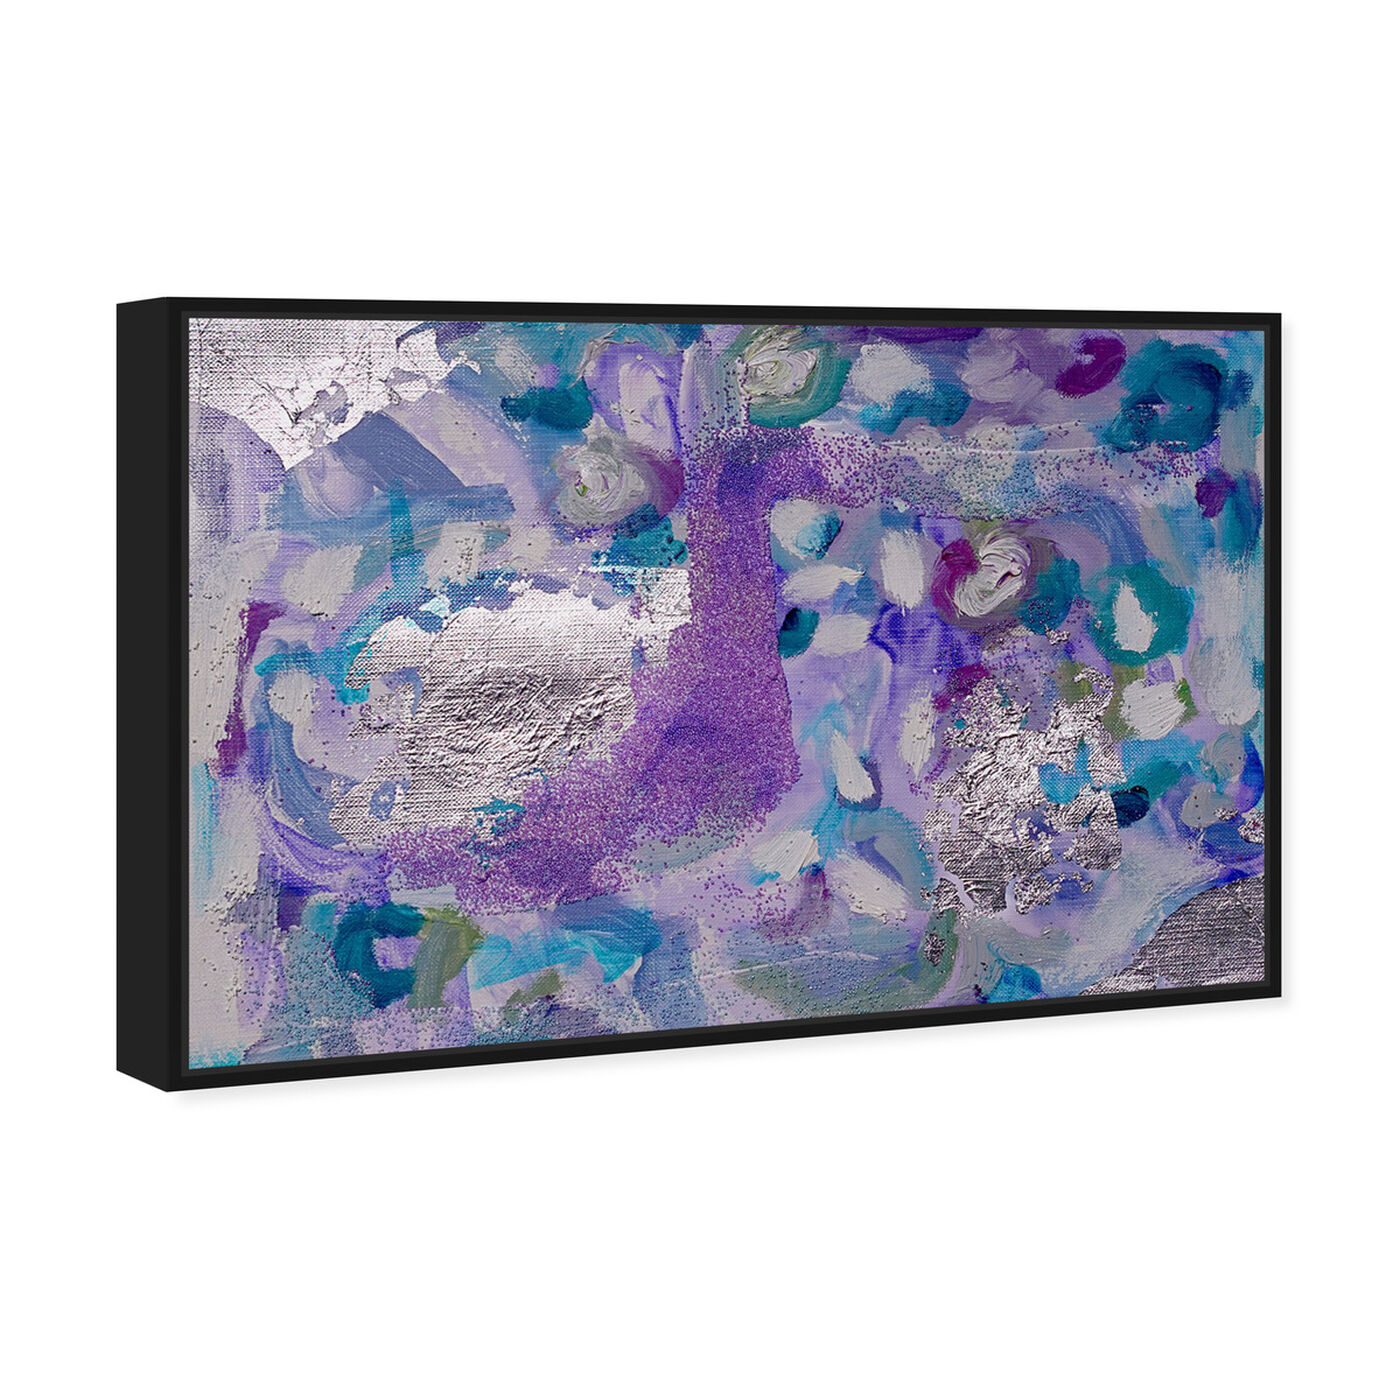 Angled view of Lilac Lining by Tiffany Pratt featuring abstract and paint art.